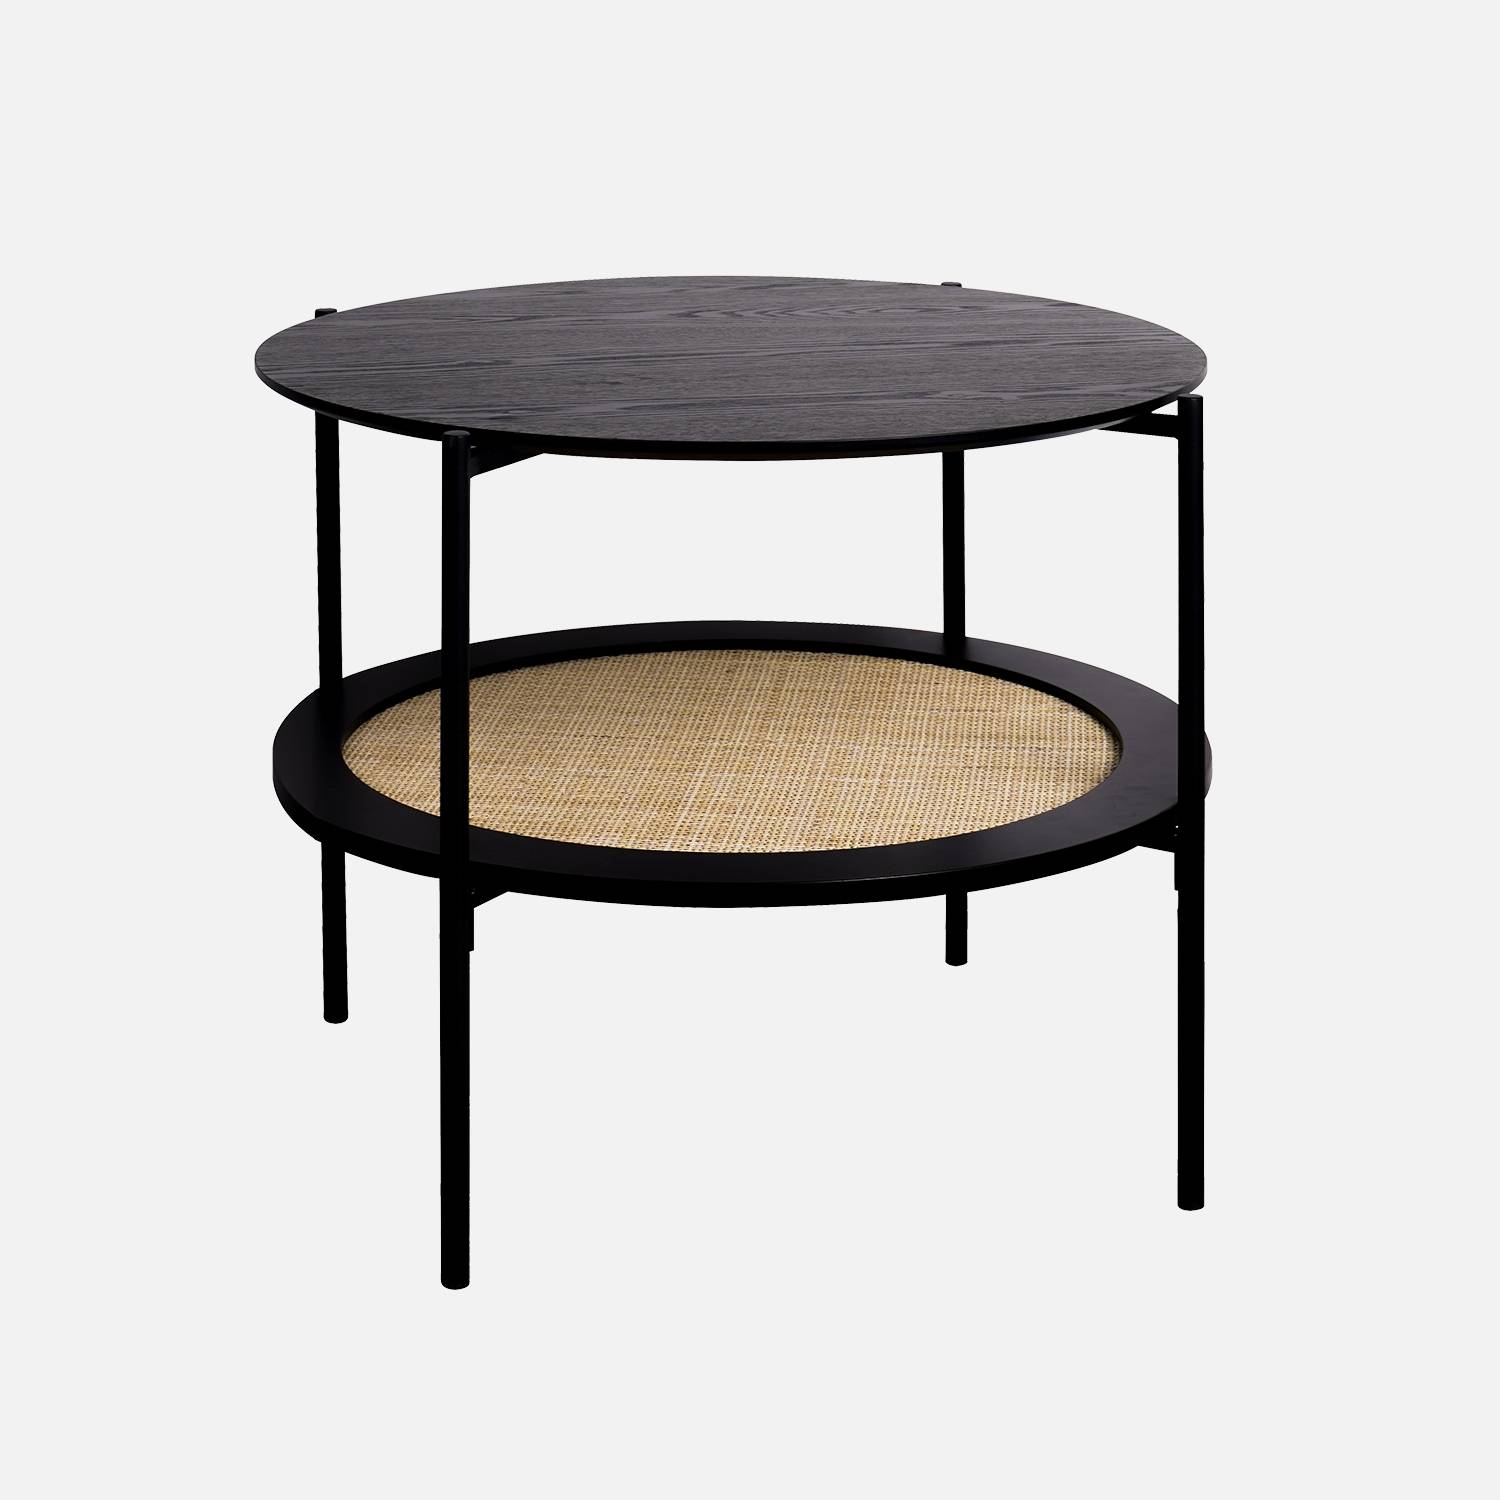 Round coffee table with wood effect and cane, Black